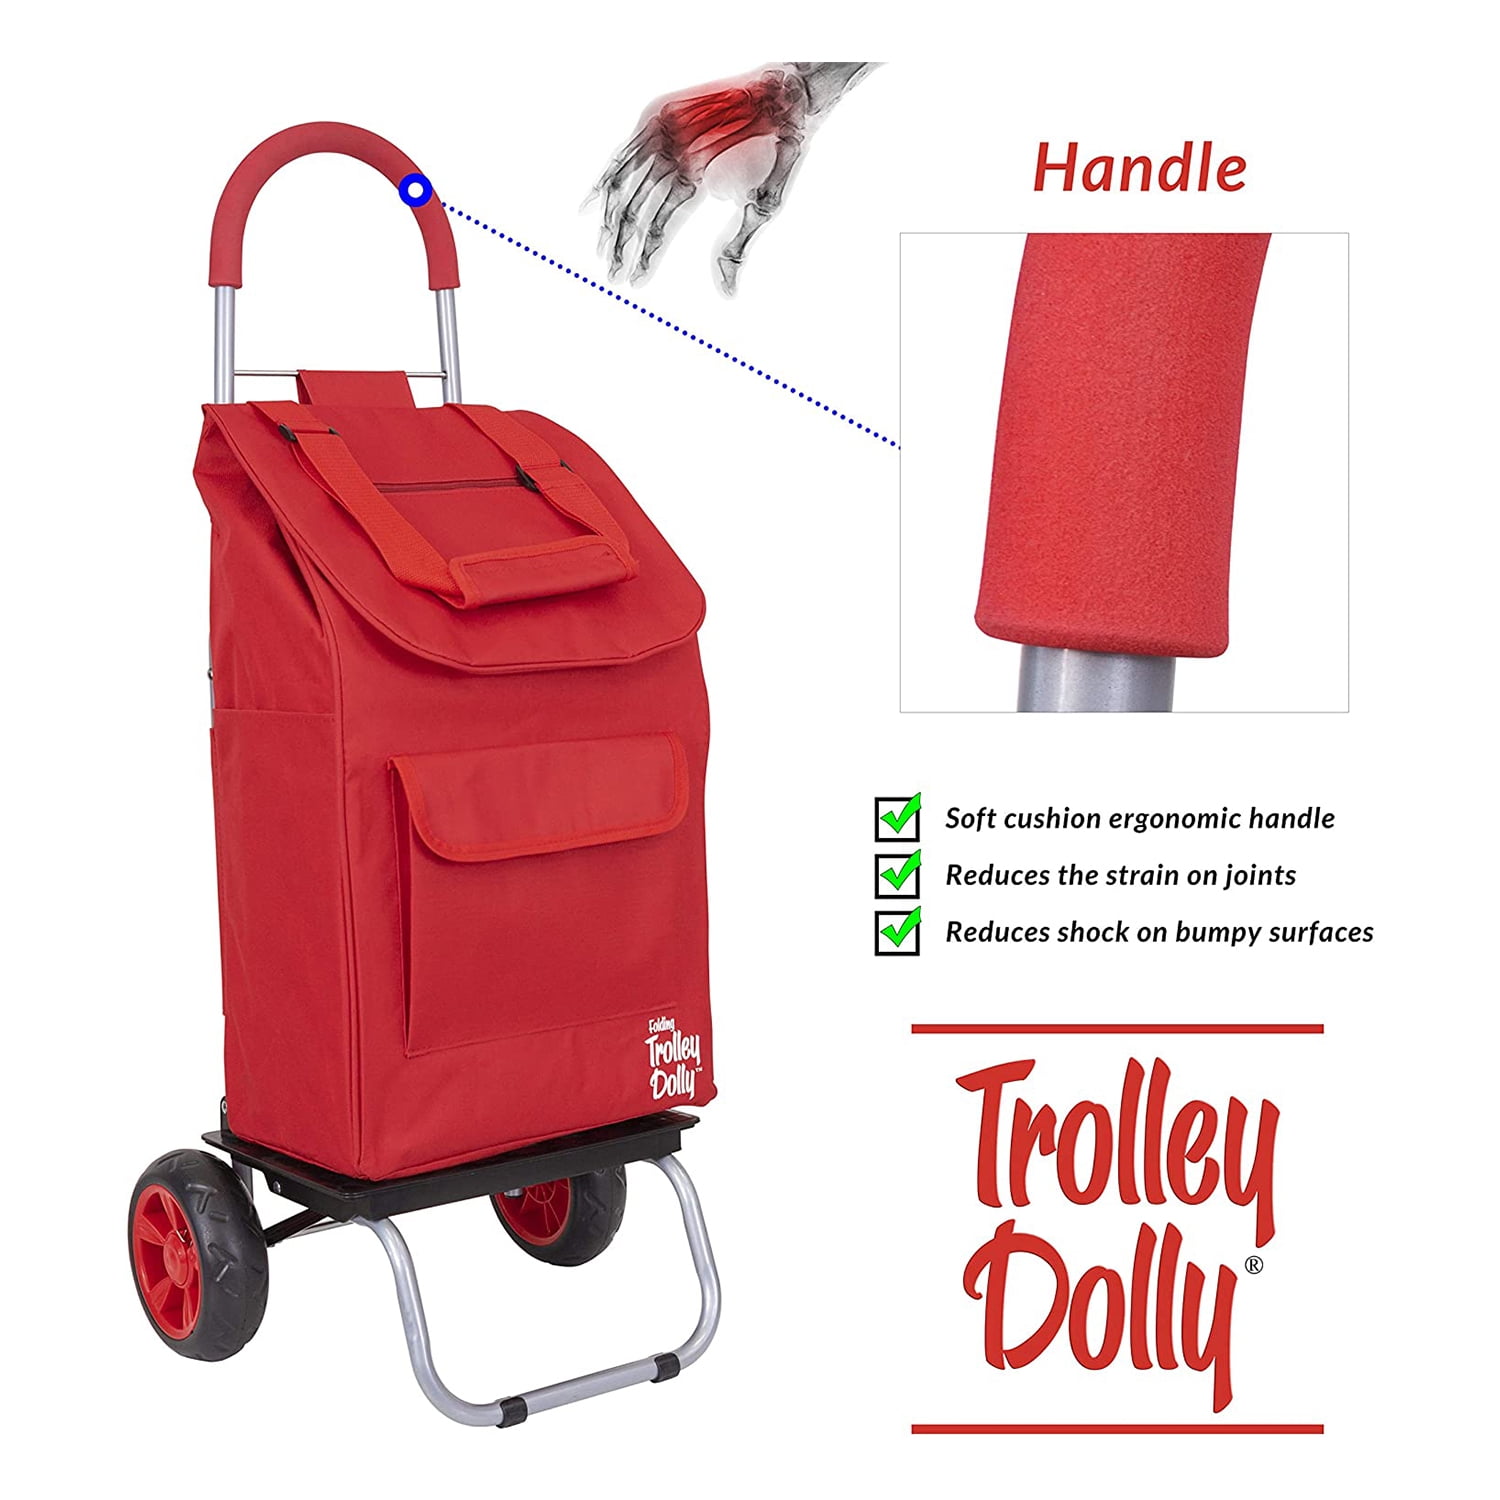 DBEST Products Trolley Dolly Red Shopping Grocery Foldable Cart for sale online 